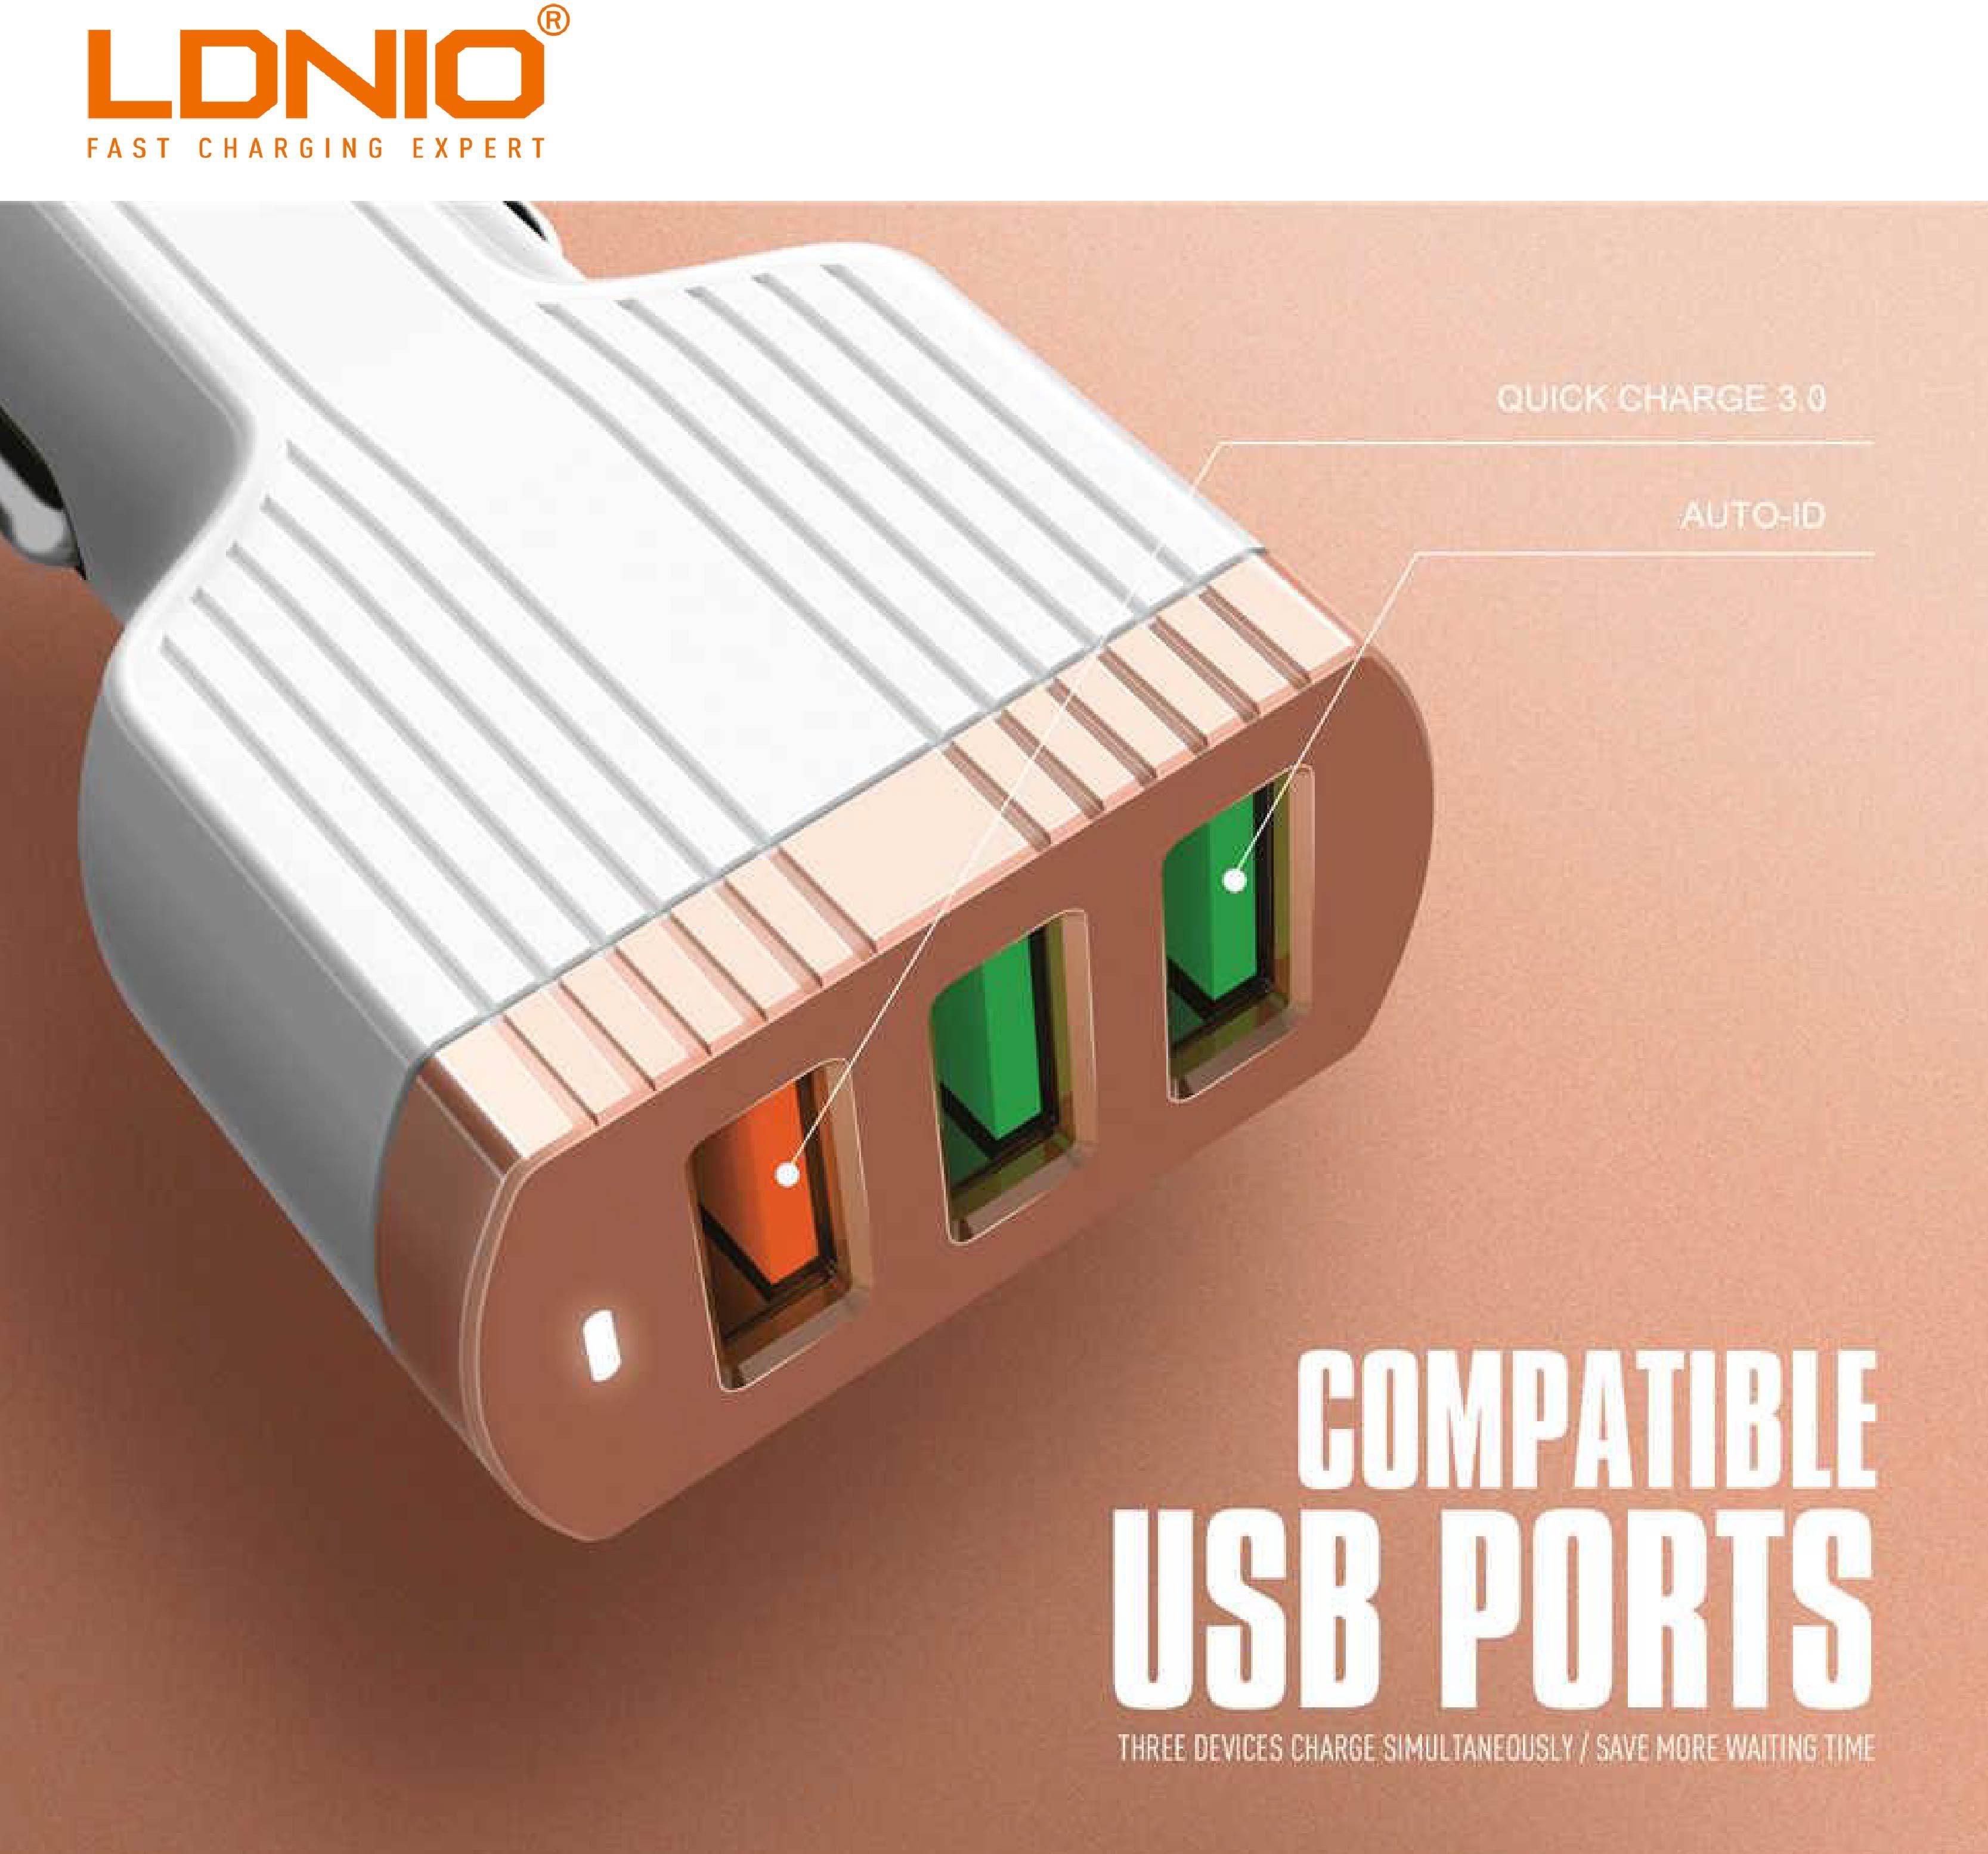 Ldnio C702Q 5.1A Auto-Id 3 USB Port Quick Charge 3.0 Car Charger